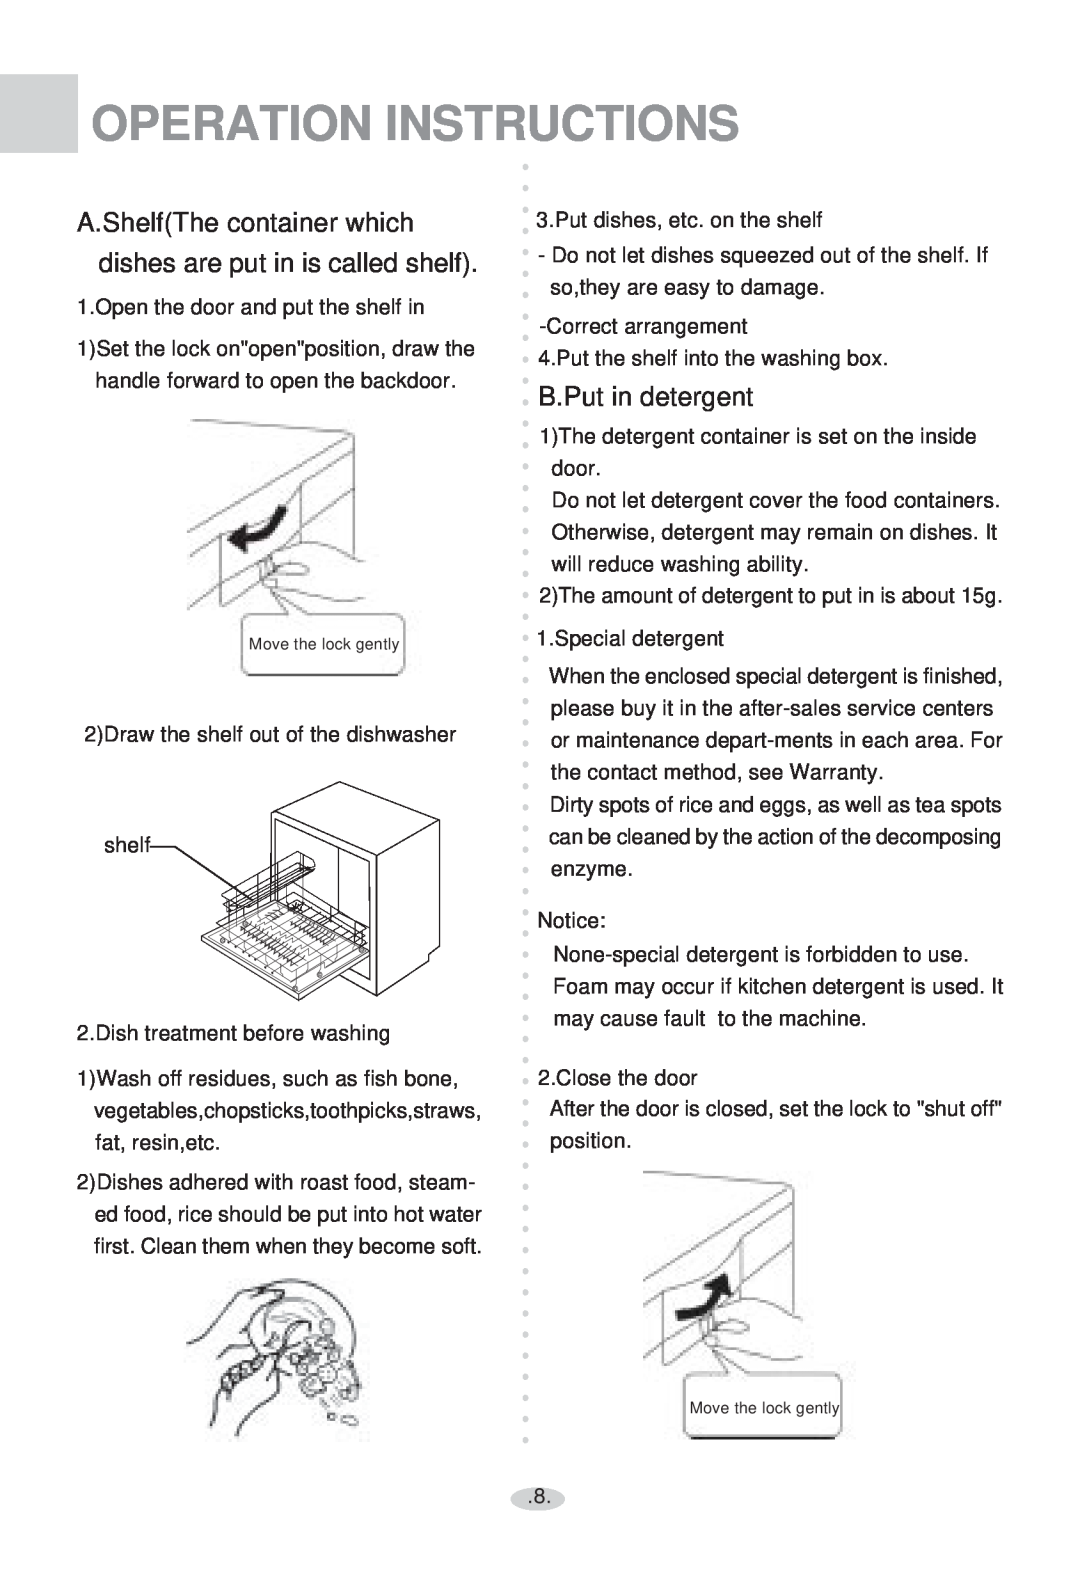 Haier WQP4-2000N Operation Instructions, A.ShelfThe container which dishes are put in is called shelf, B.Put in detergent 